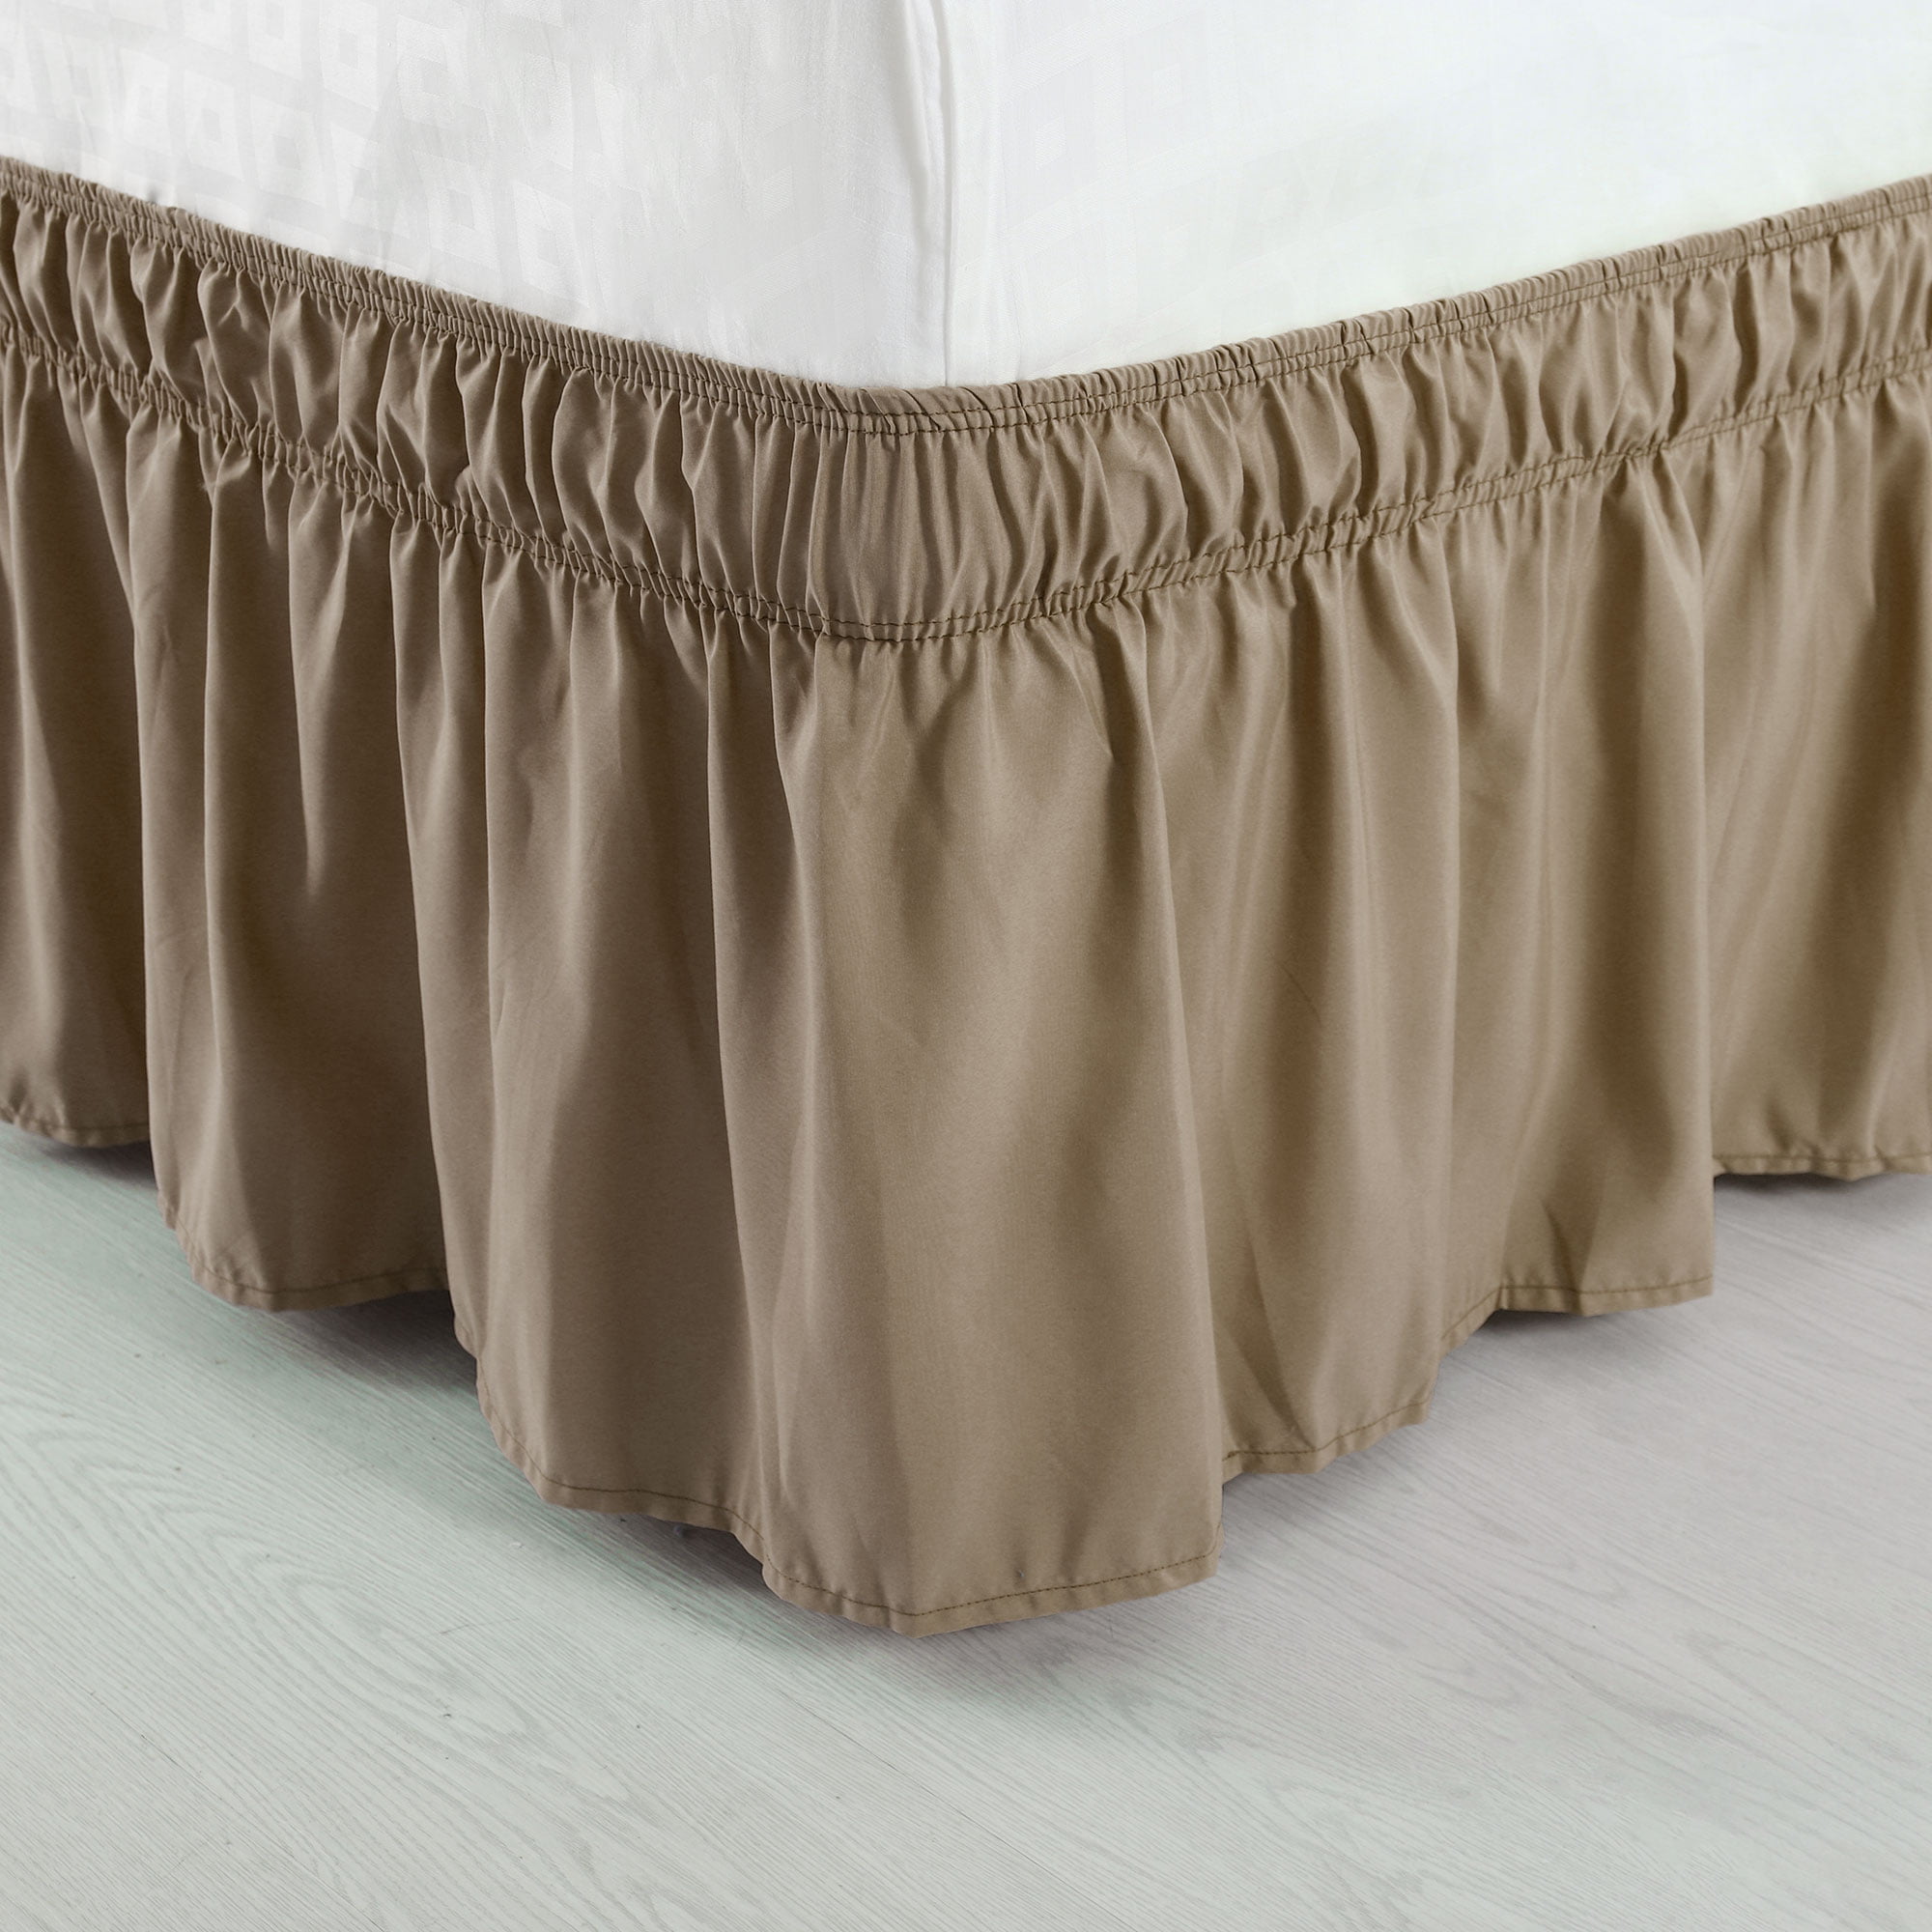 Bed Skirts SOLID BROWN BEDSKIRT Twin Queen or King 100% COTTON KHAKI ...